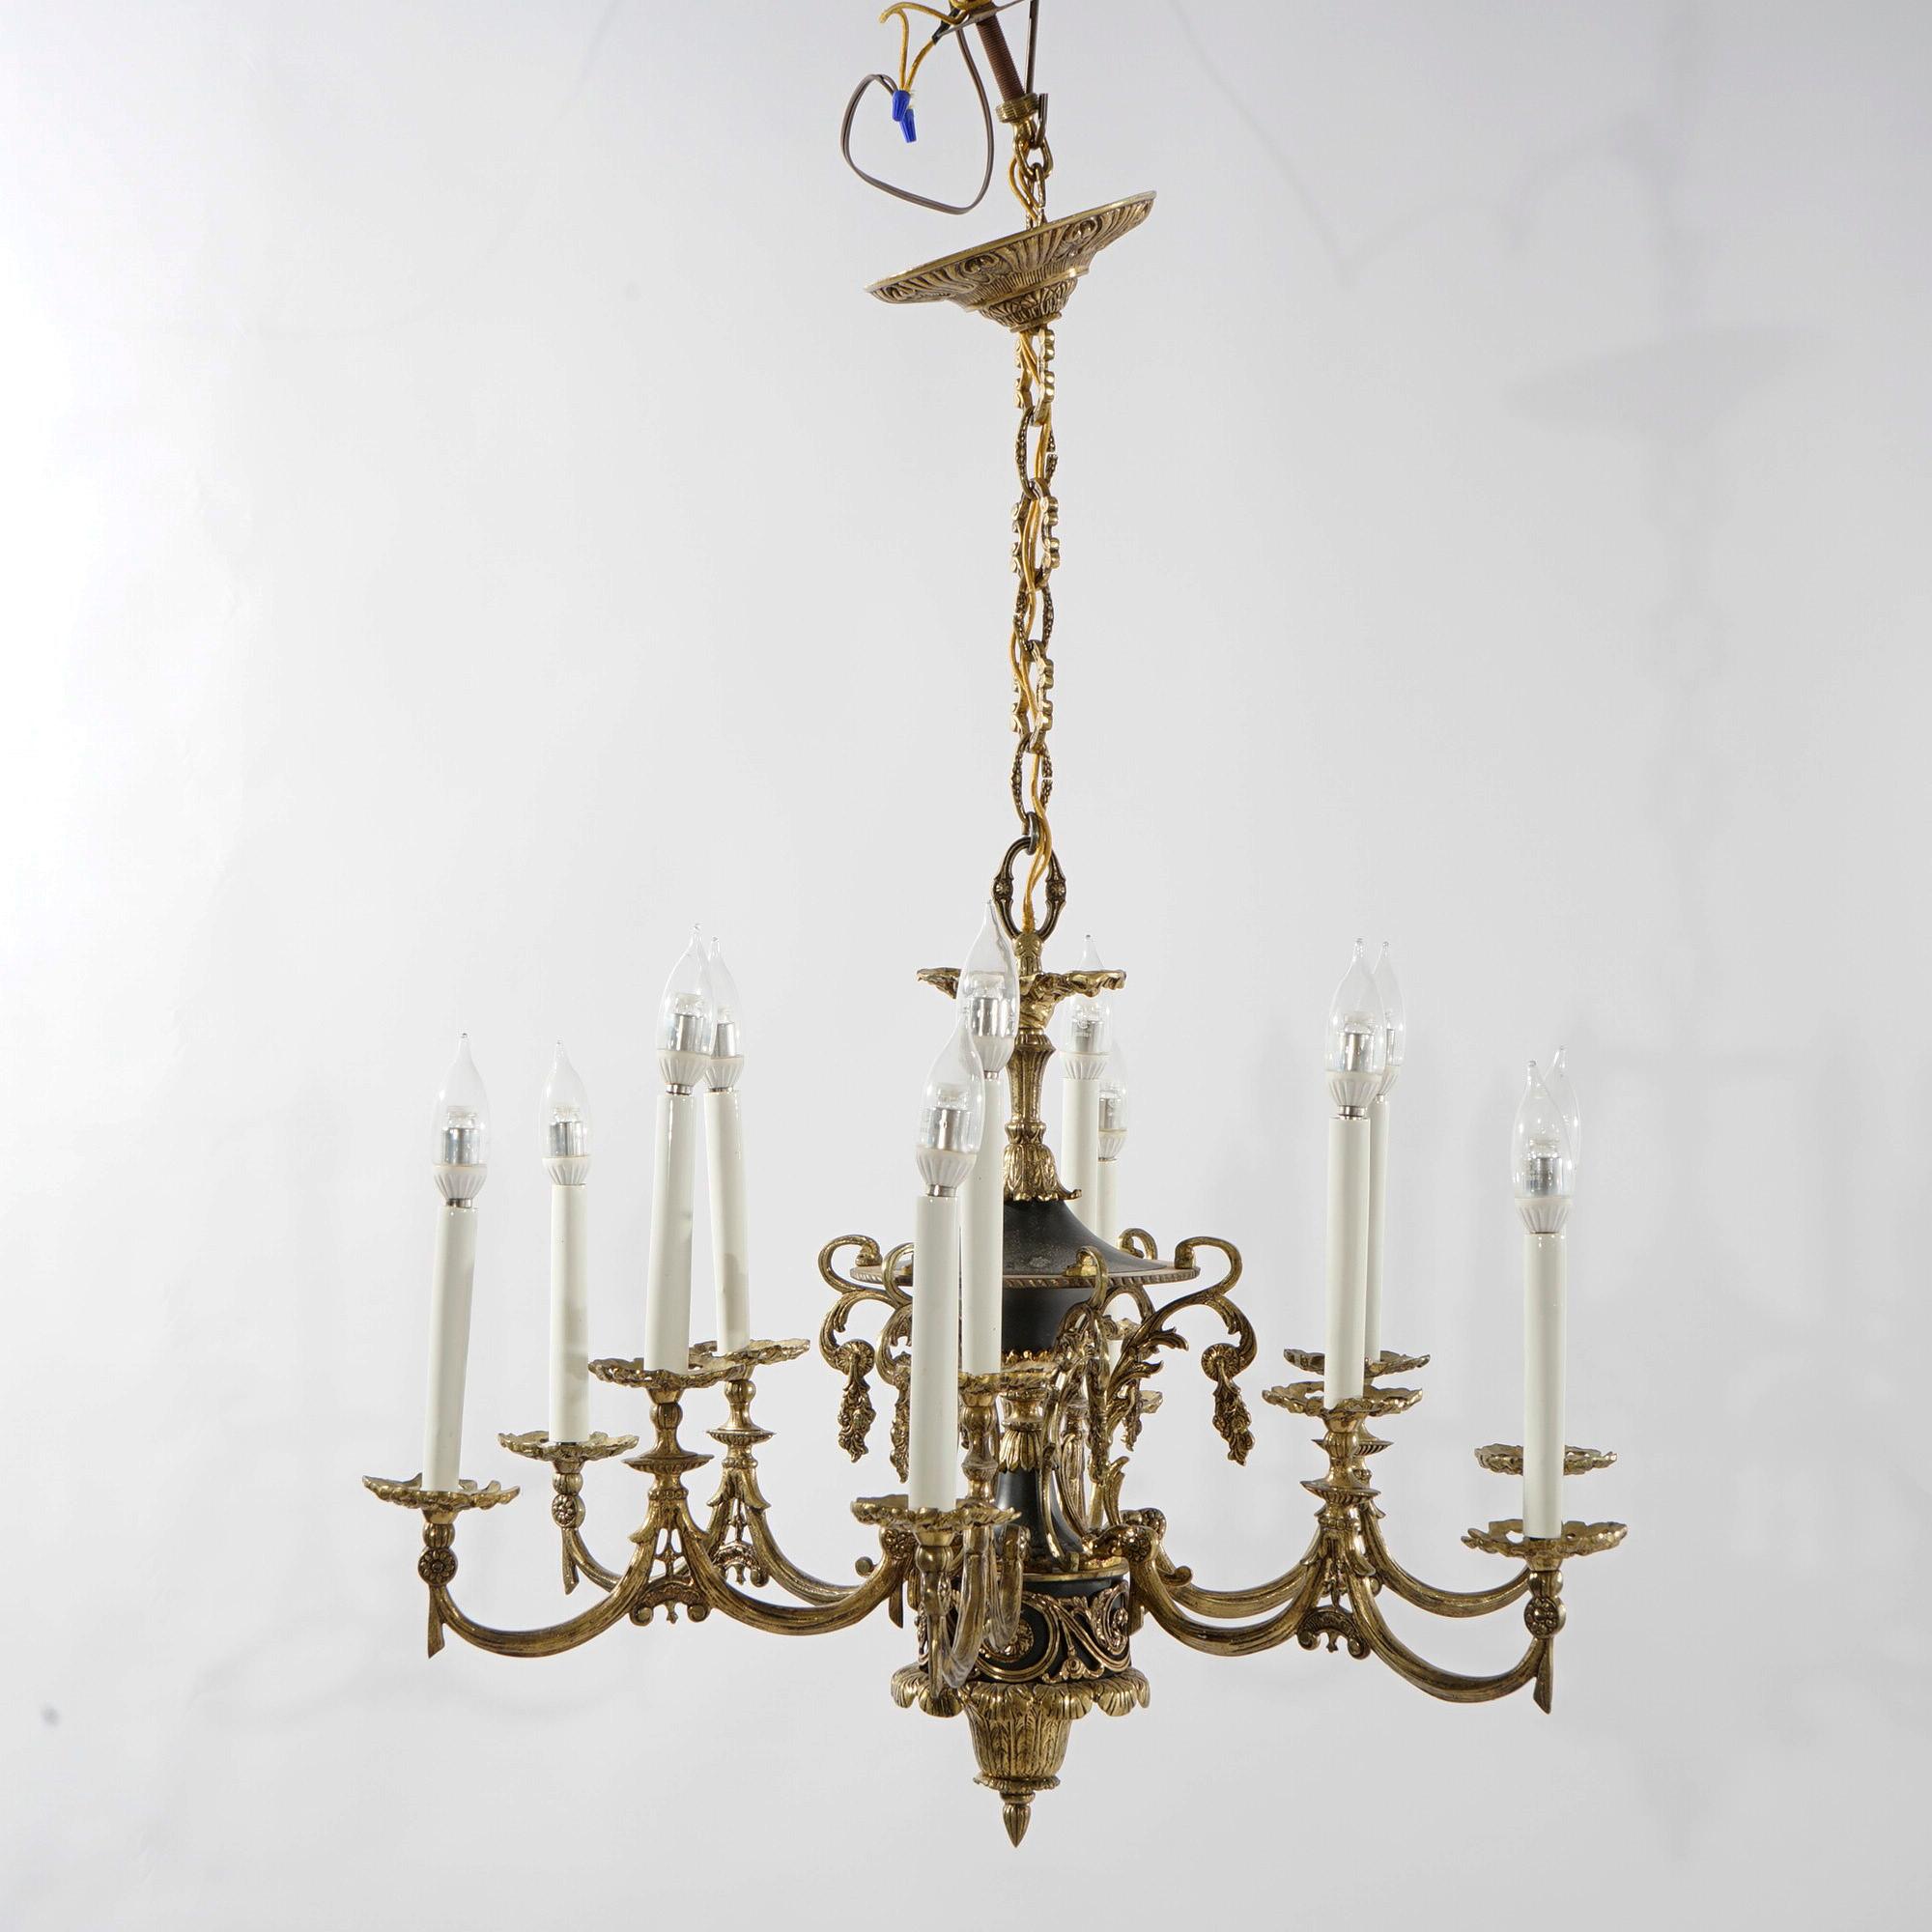 Antique French Empire Style Ebonized Bronze Twelve-Light Chandelier, Early 20thC In Good Condition For Sale In Big Flats, NY